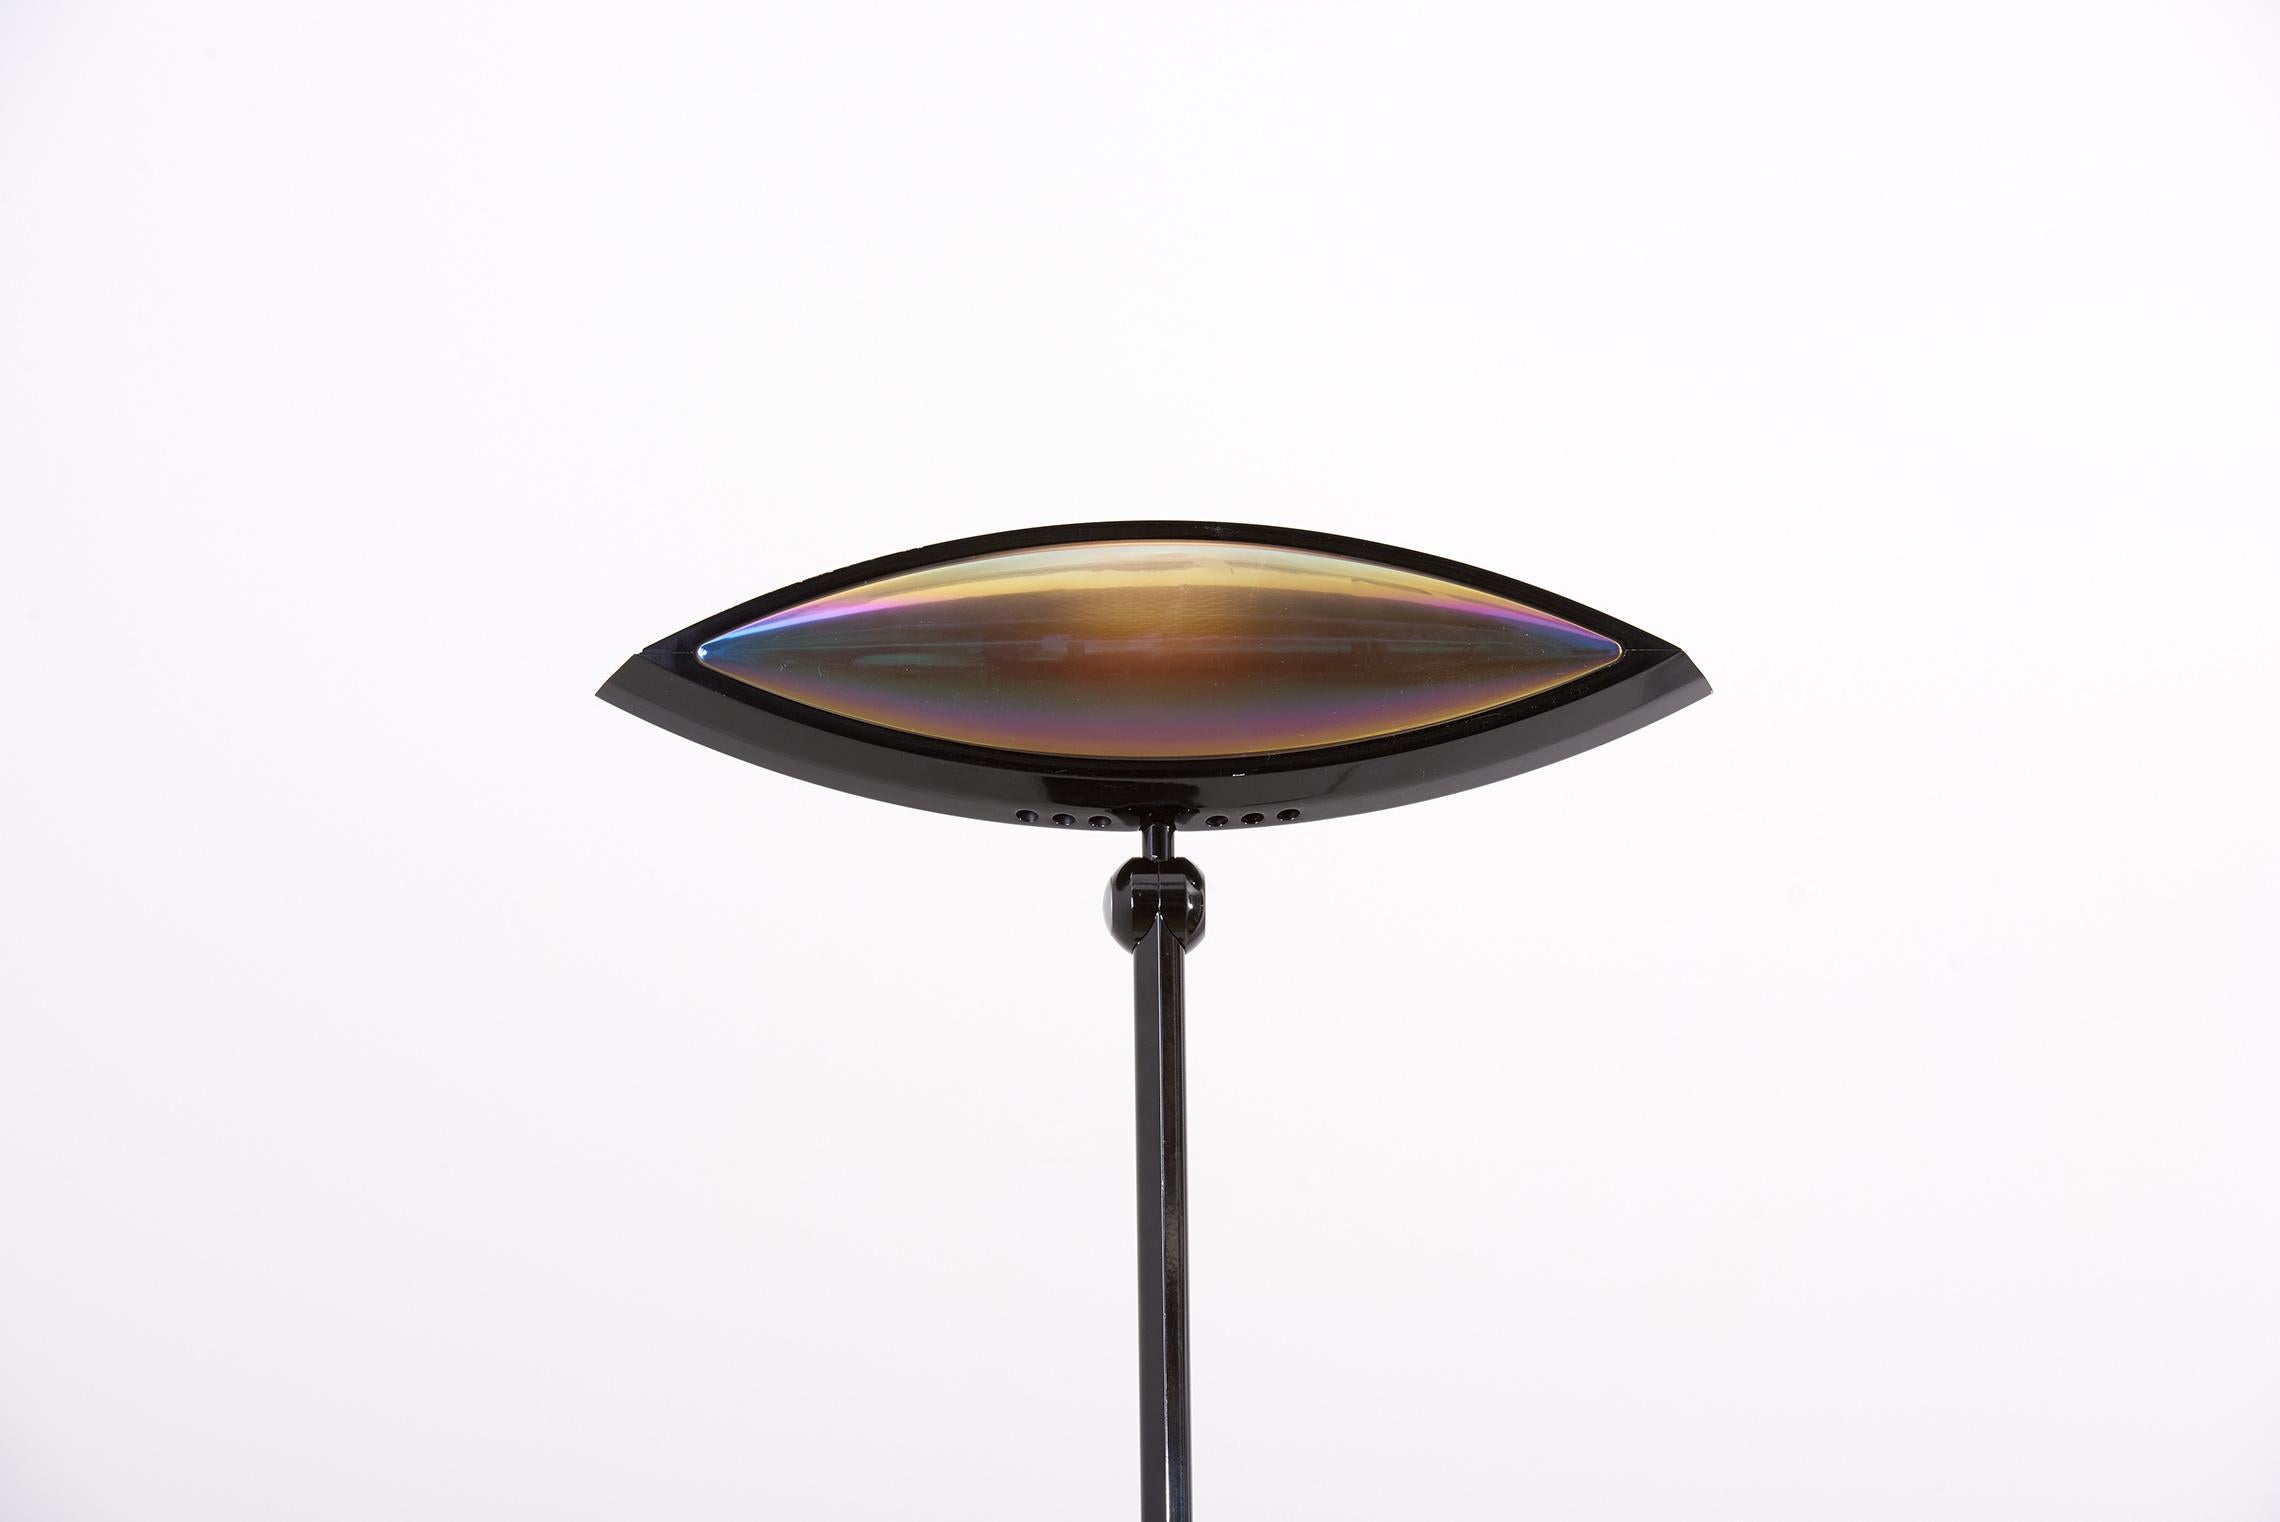 'Aeto' by Fabio Lombardo for Flos, blue floor lamp in the shape of an eye, Italy, 1980s. Well-designed floor lamp that features an adjustable eye-form light and features a round black metal base and a blue stem. This lamp is archetypical for postwar